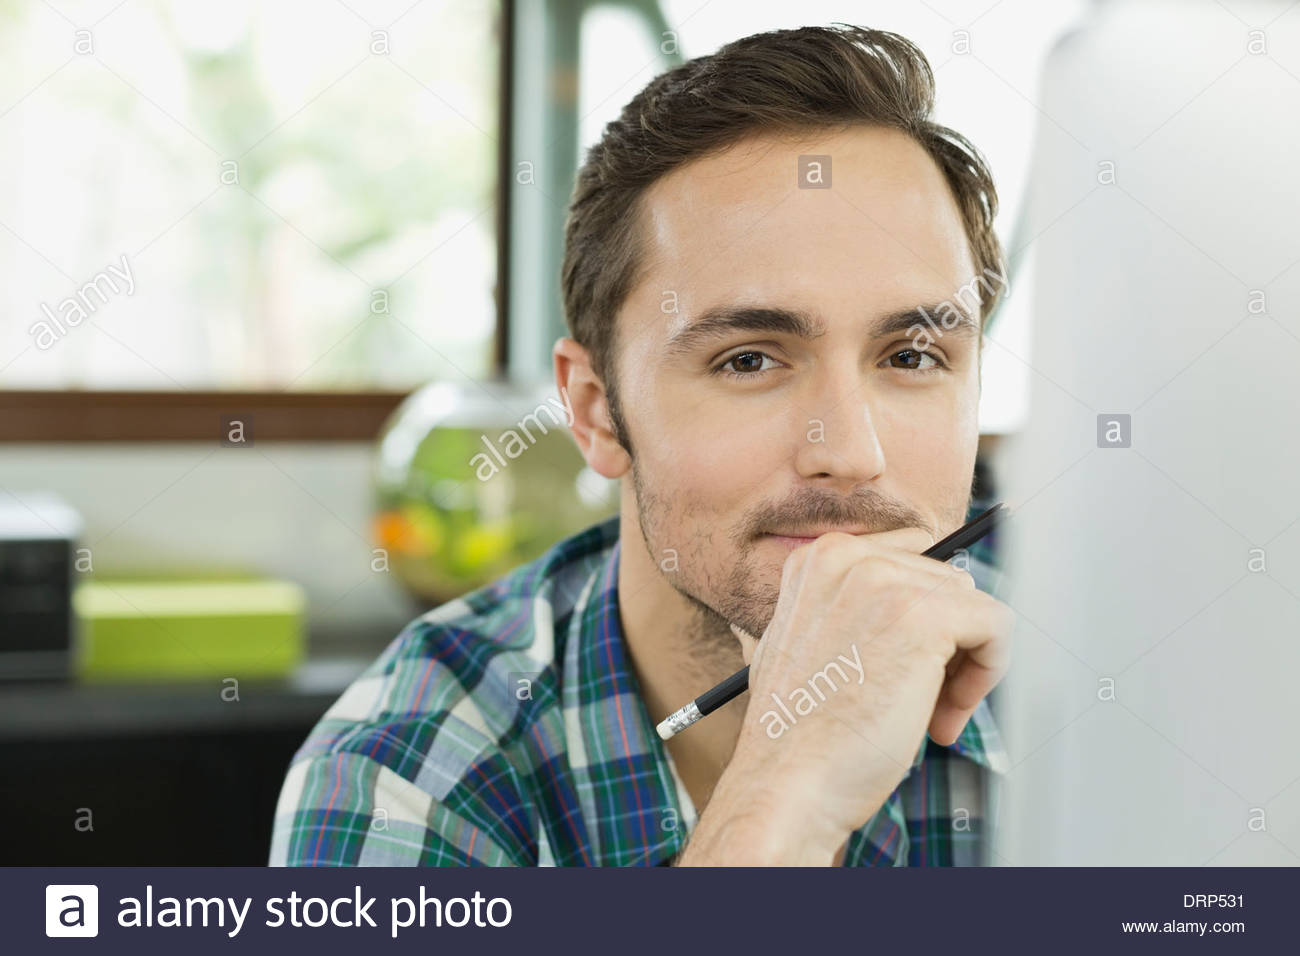 Portrait of young working professional in home office Stock Photo